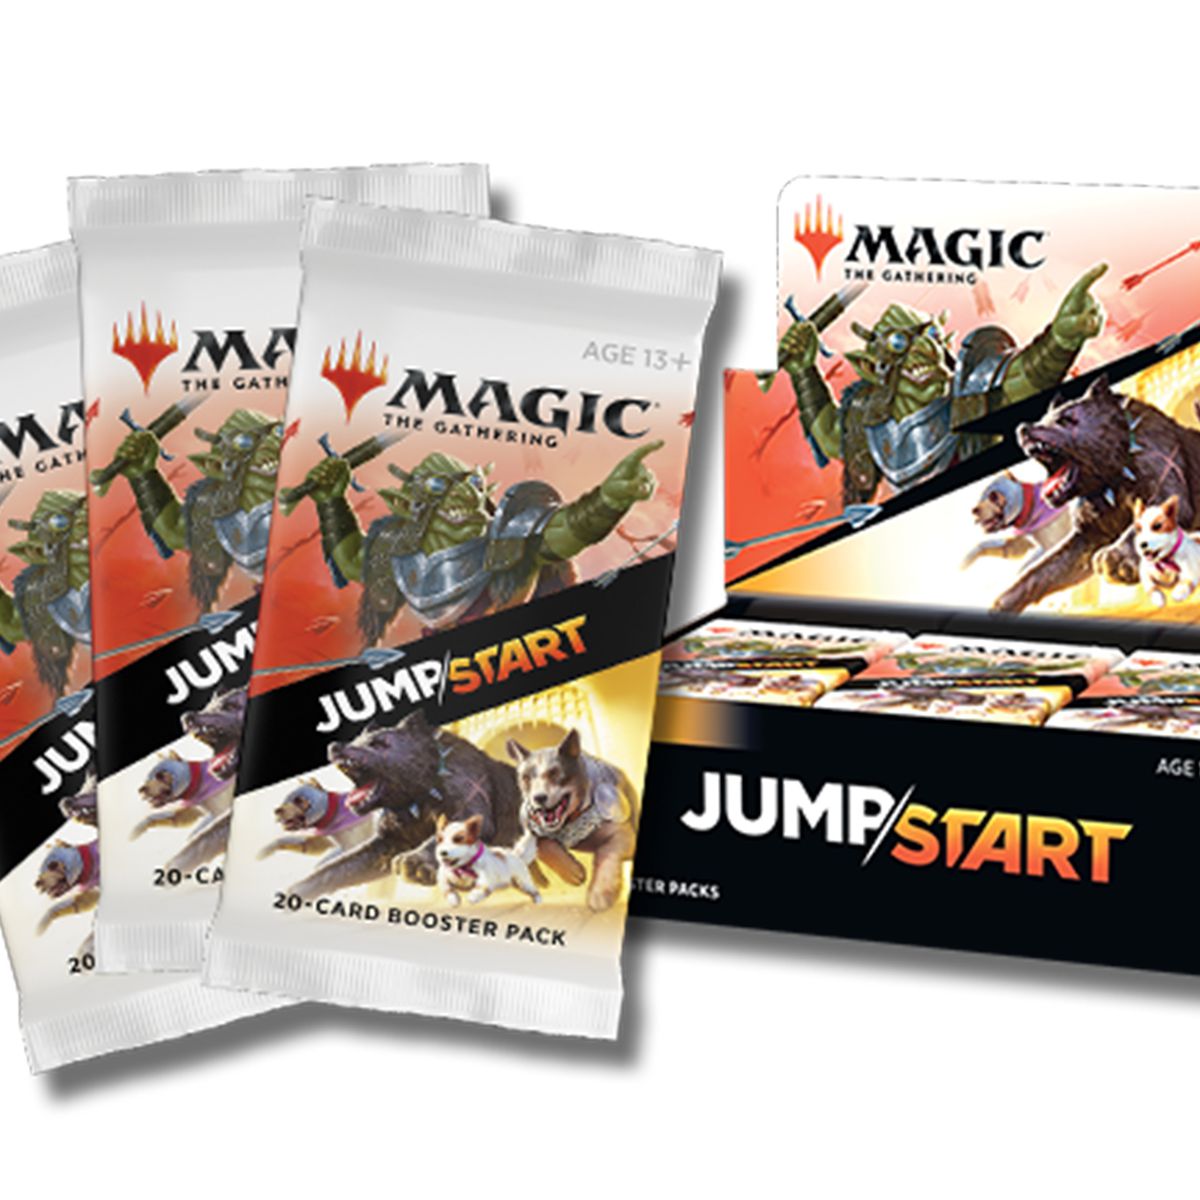 Packs of Jumpstart cards will feature dogs and orcs on the pack art. The graphic design, which splits the two factions with the Jumpstart name, emphasizes that you need 2 packs to play.